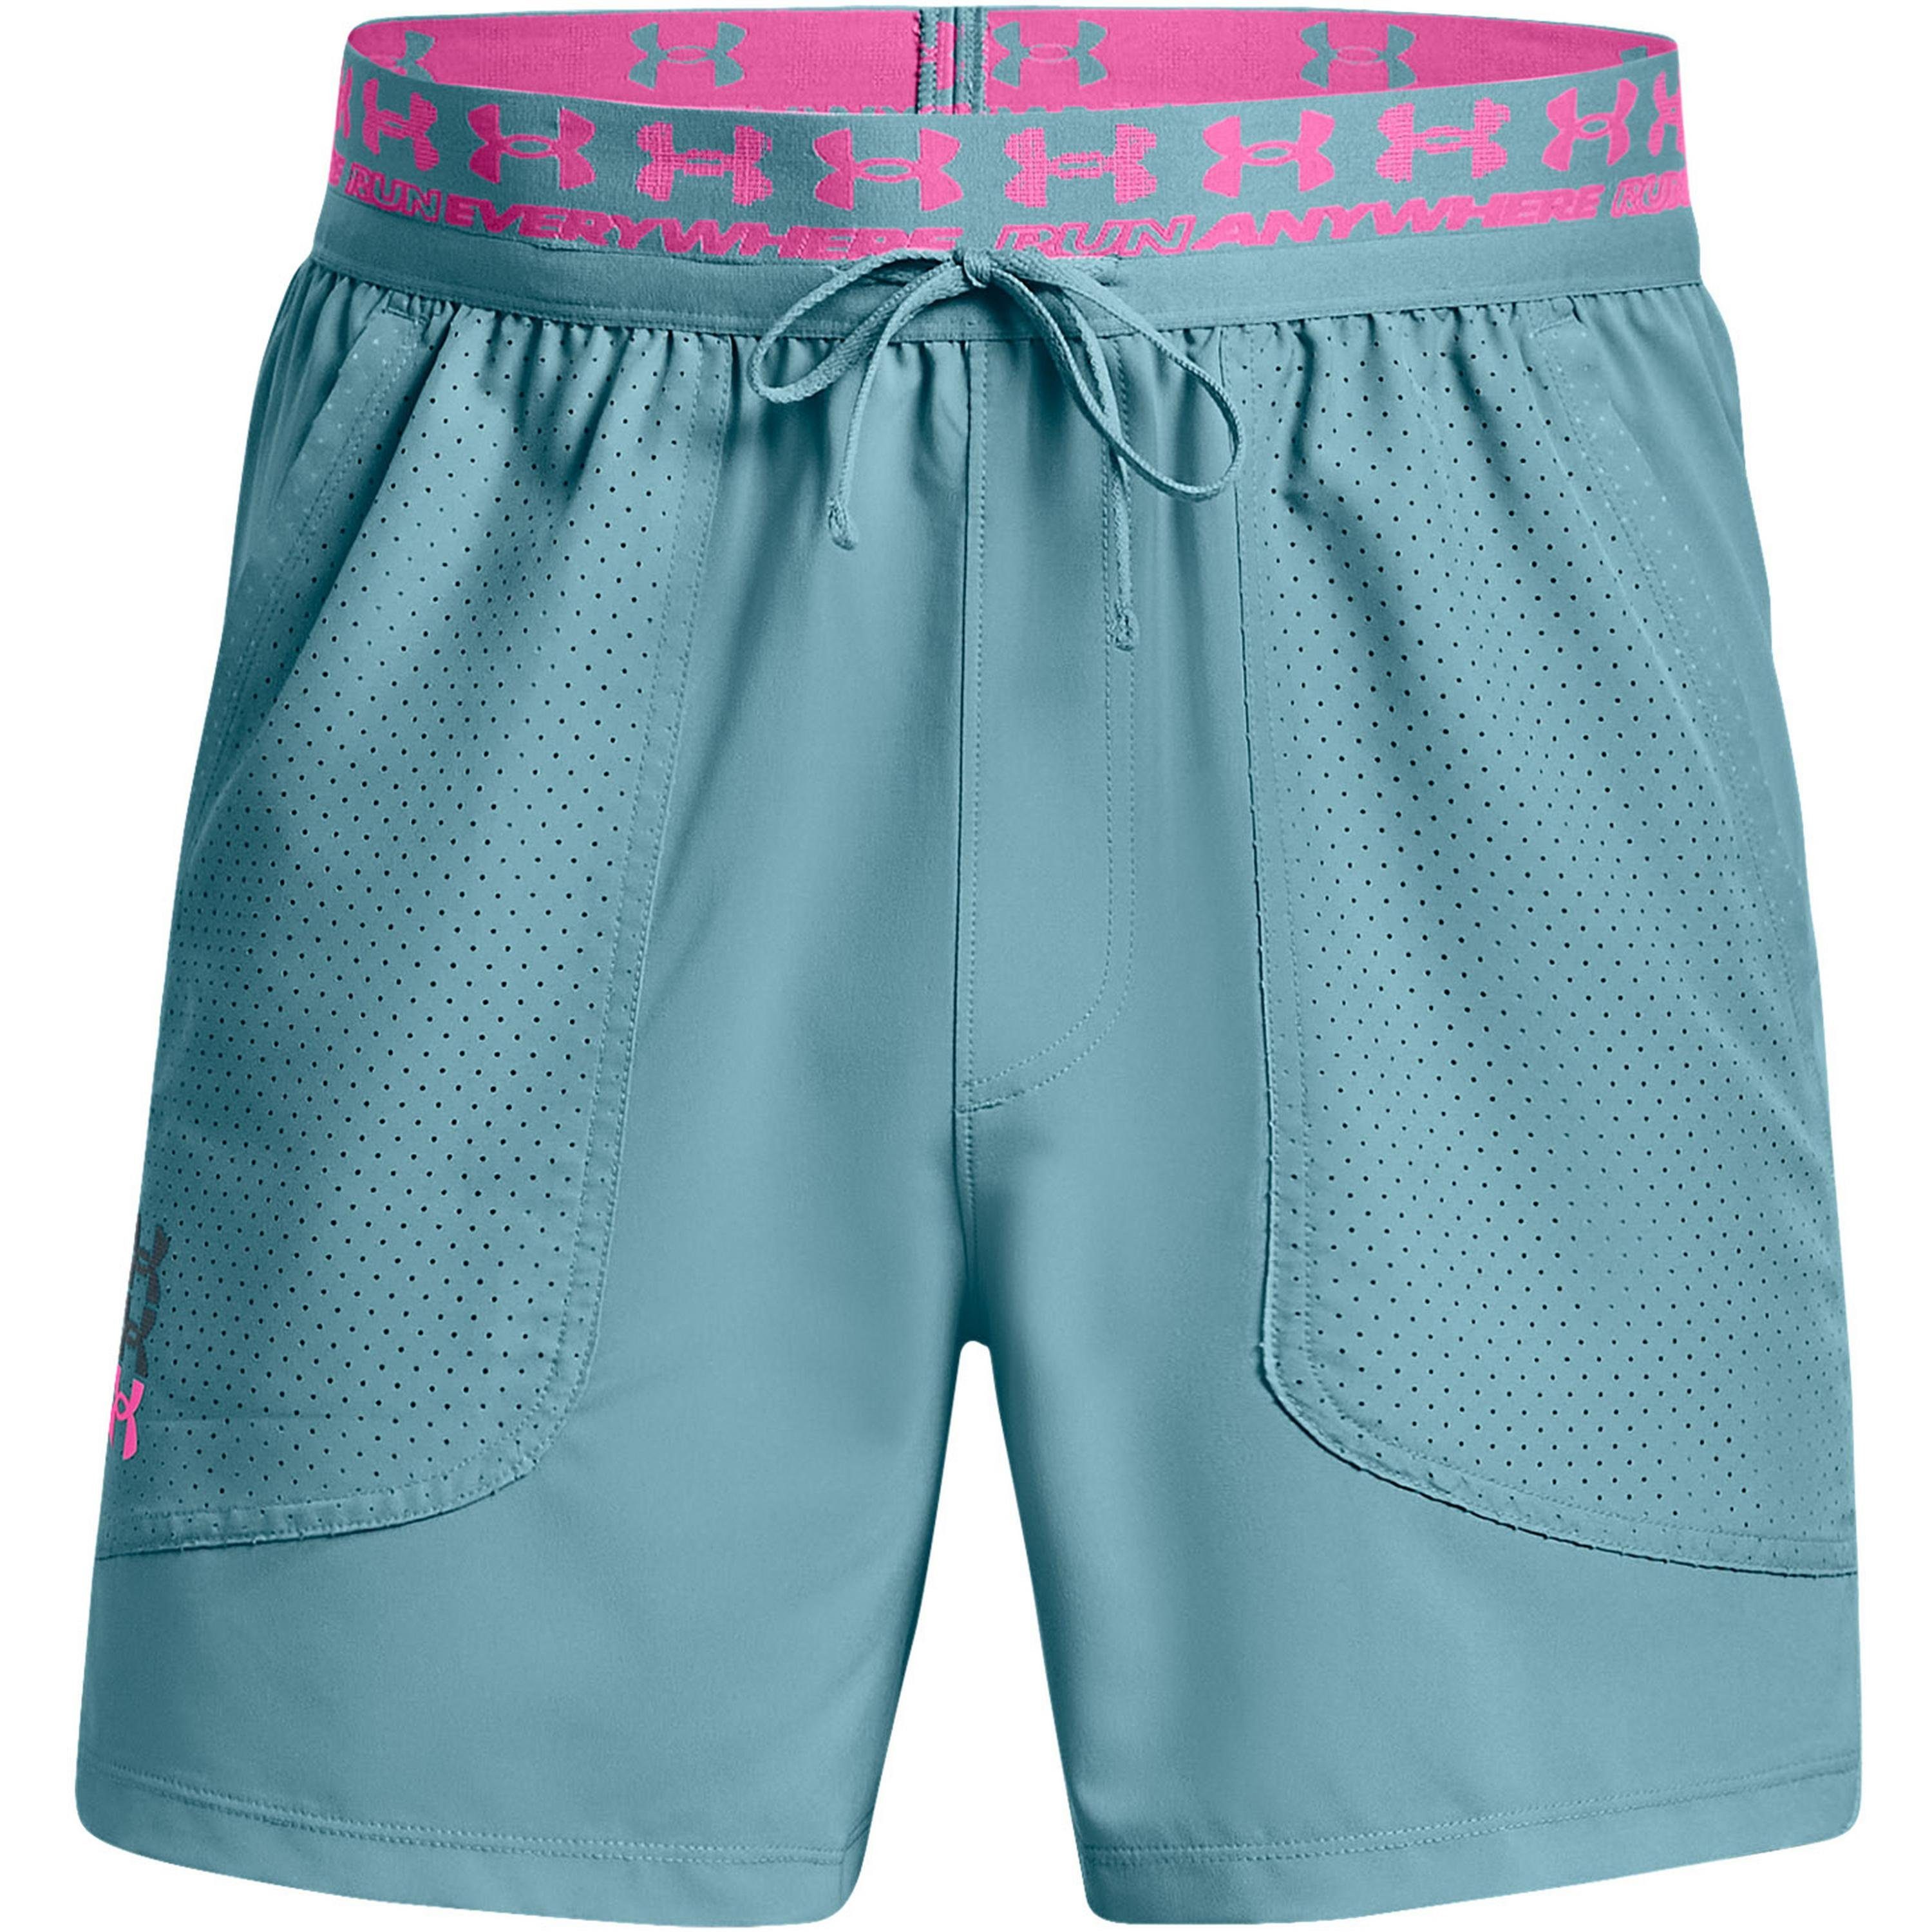 stillwater-rebelpink-reflective ANYWHERE Armour® Funktionsshorts Under